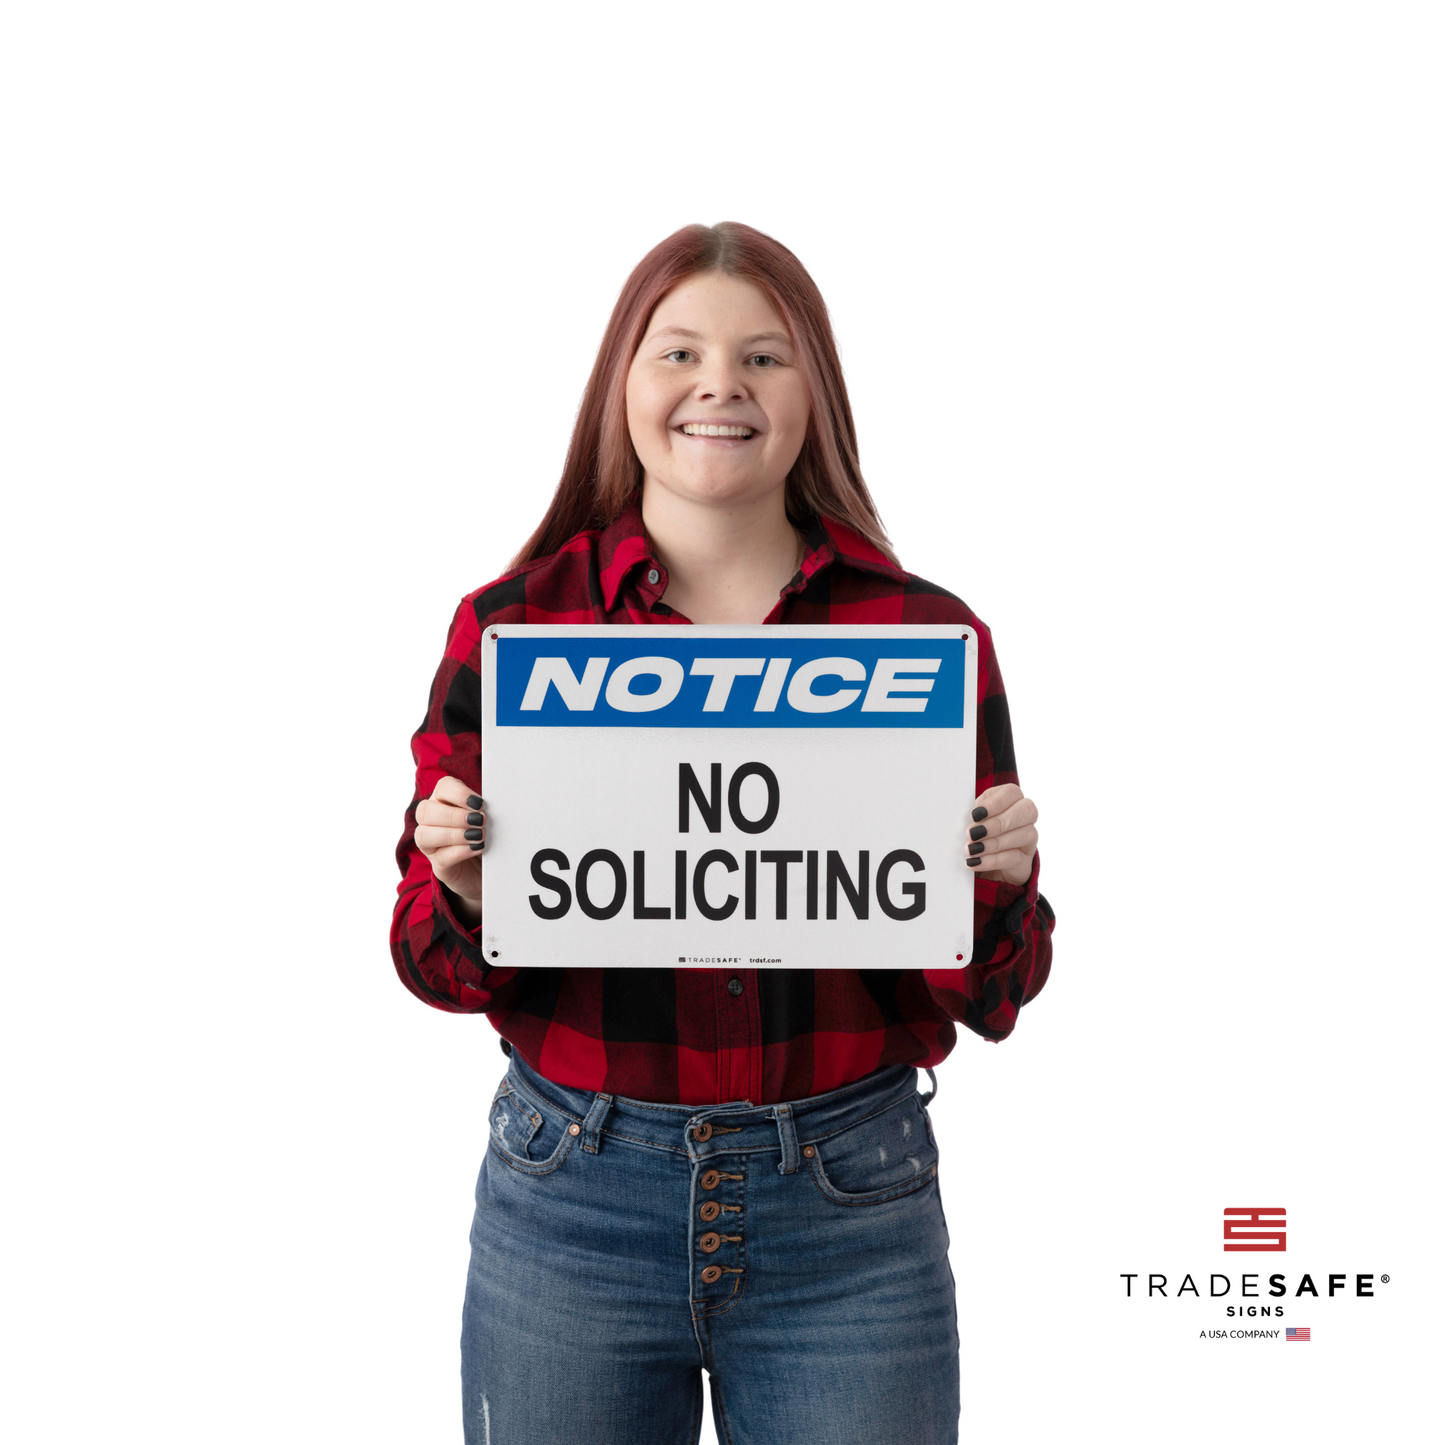 a person holding a notice sign with the text "no soliciting"